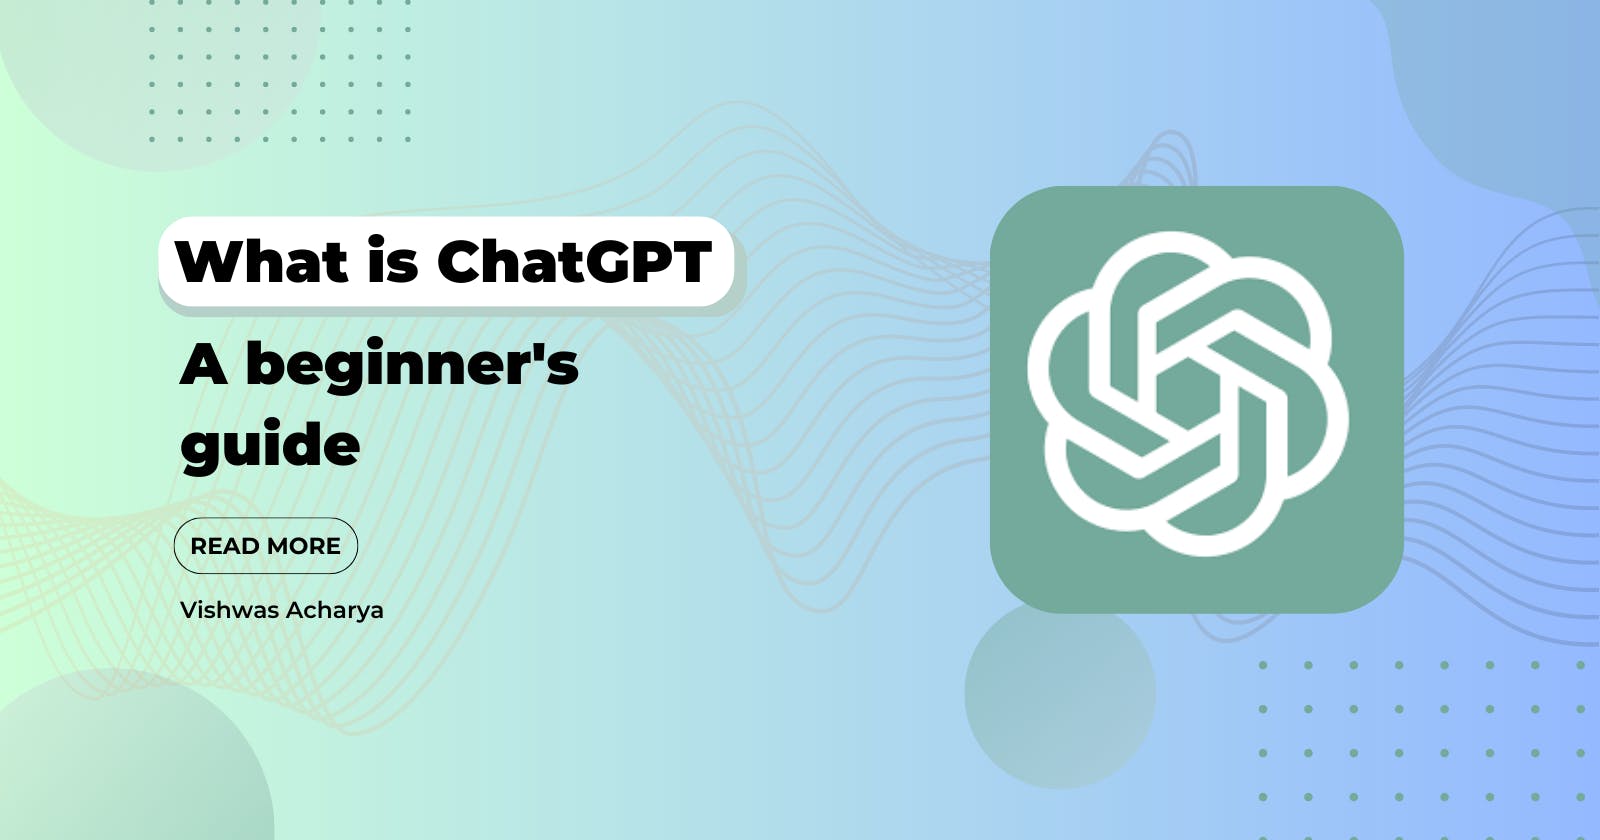 What is ChatGPT? A beginner's guide